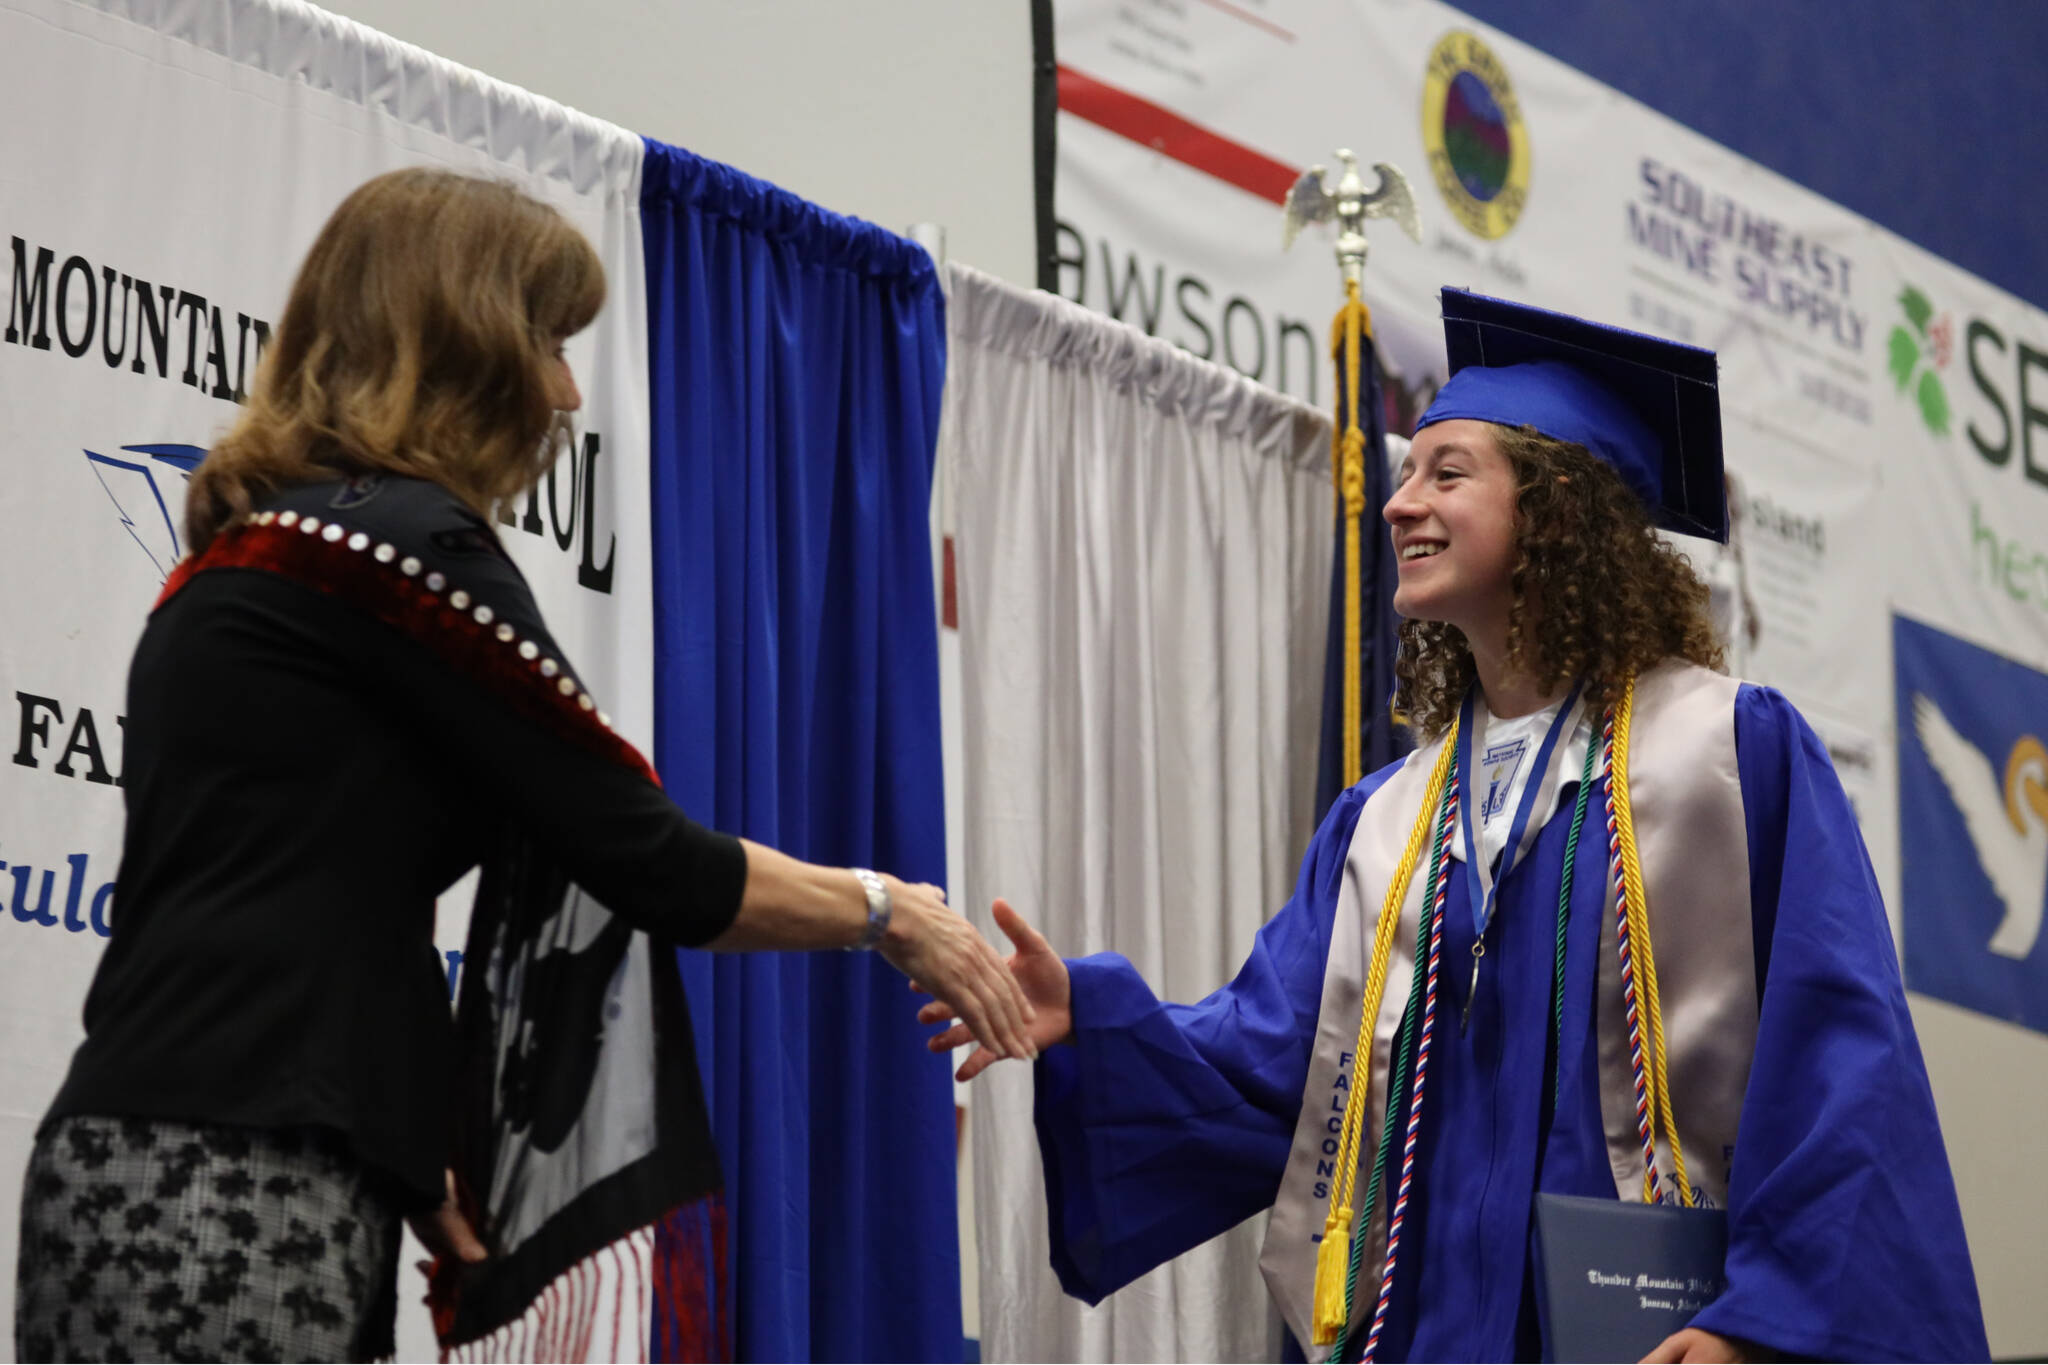 Thunder Mountain High School Senior Class President Mackenzie Olver shakes hands with Juneau School District Superintendent Bridget Weiss after receiving her diploma at the 2023 graduation ceremony Sunday afternoon. (Clarise Larson / Juneau Empire)